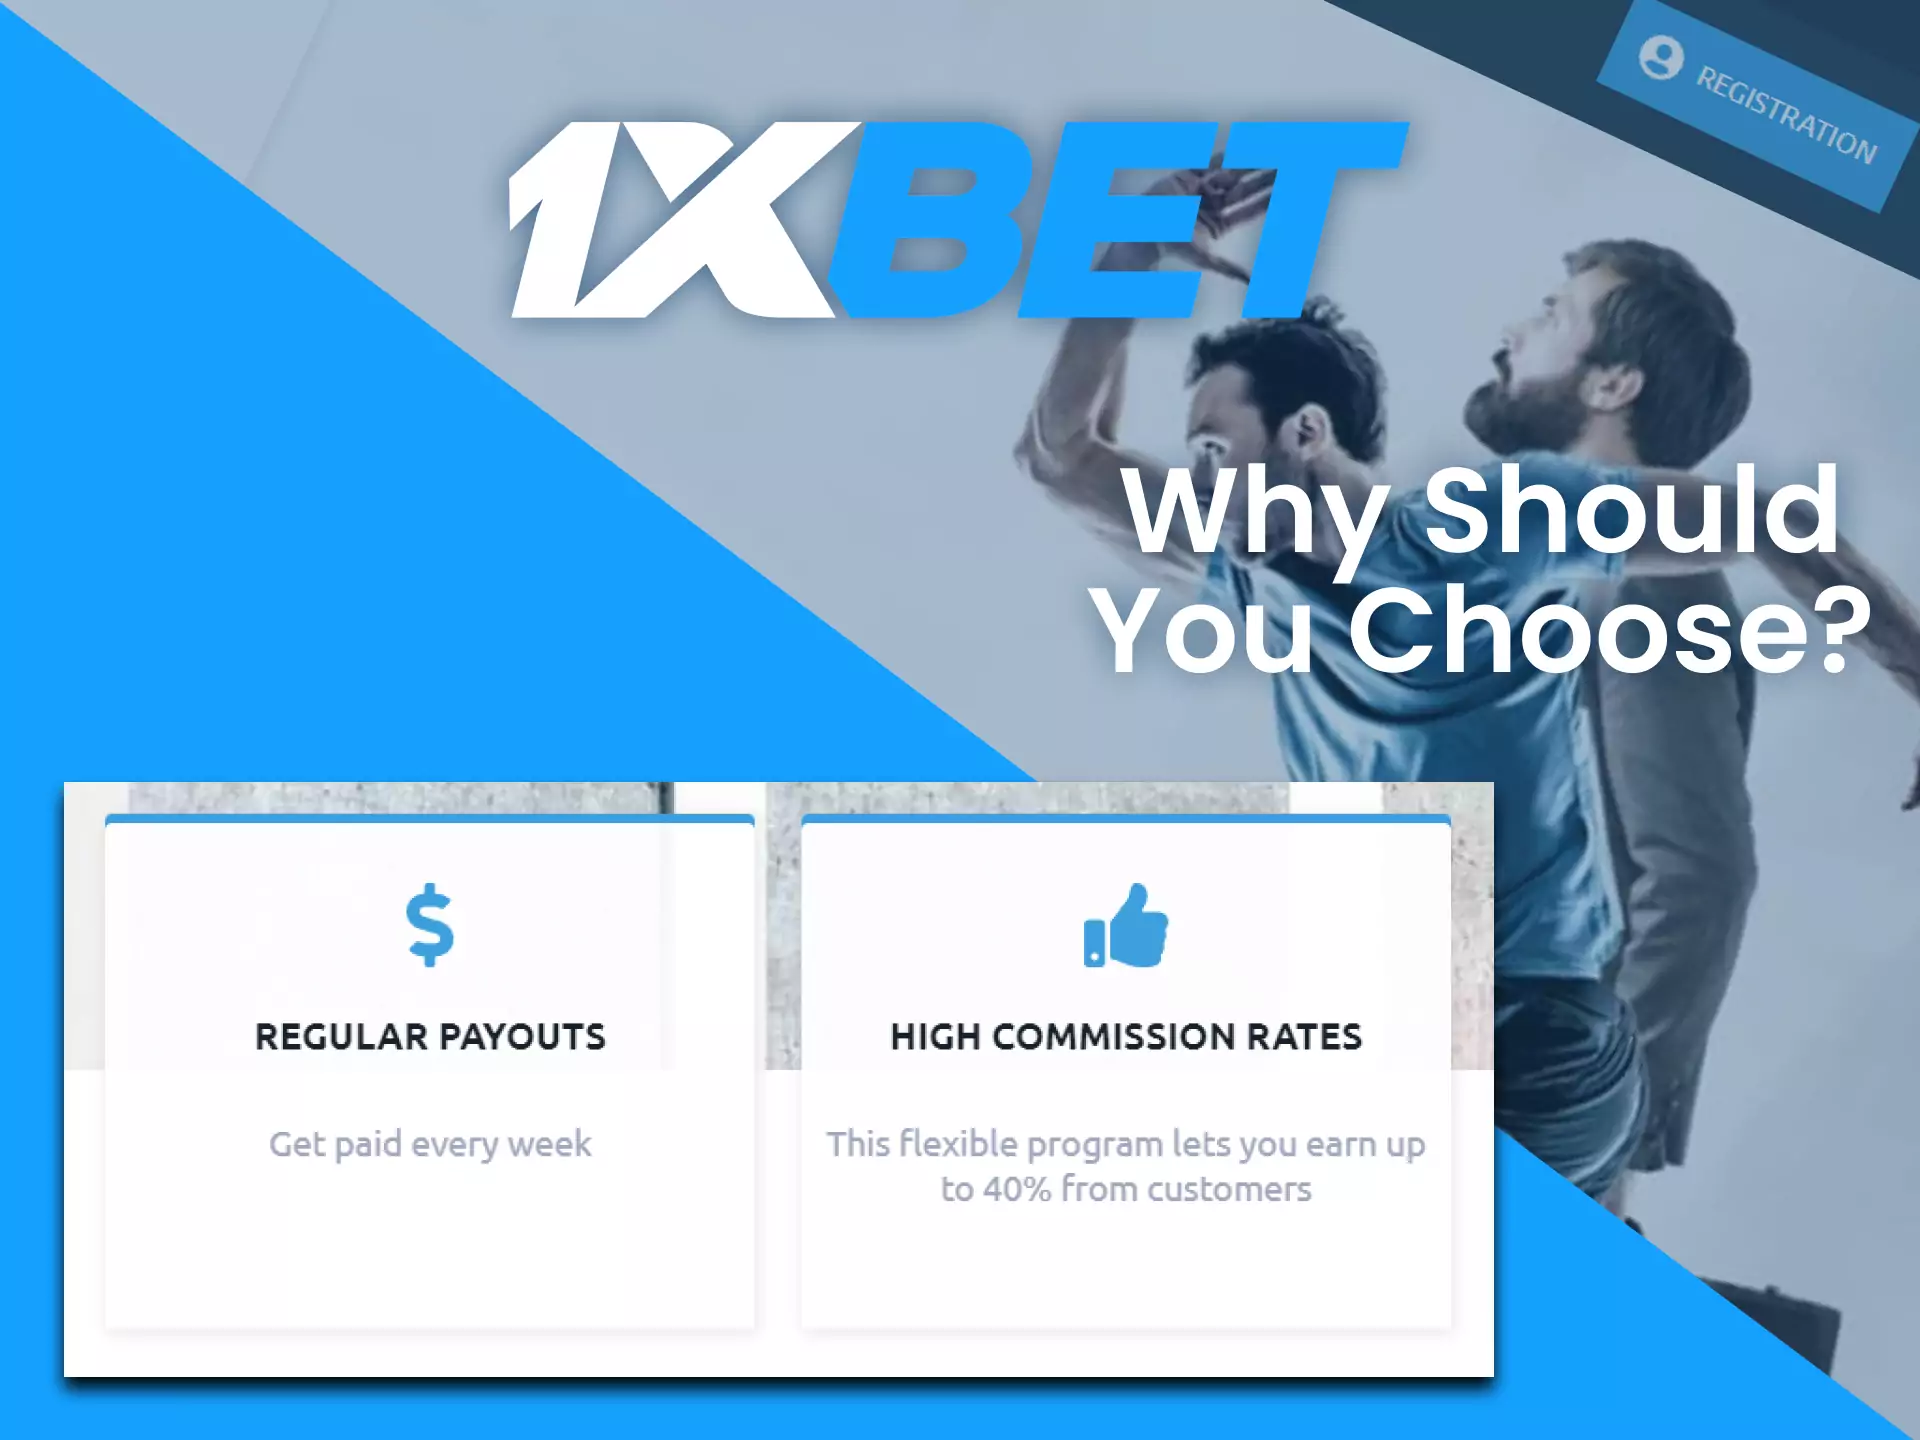 1xbet suggests great conditions for newcomers to the affiliate club.